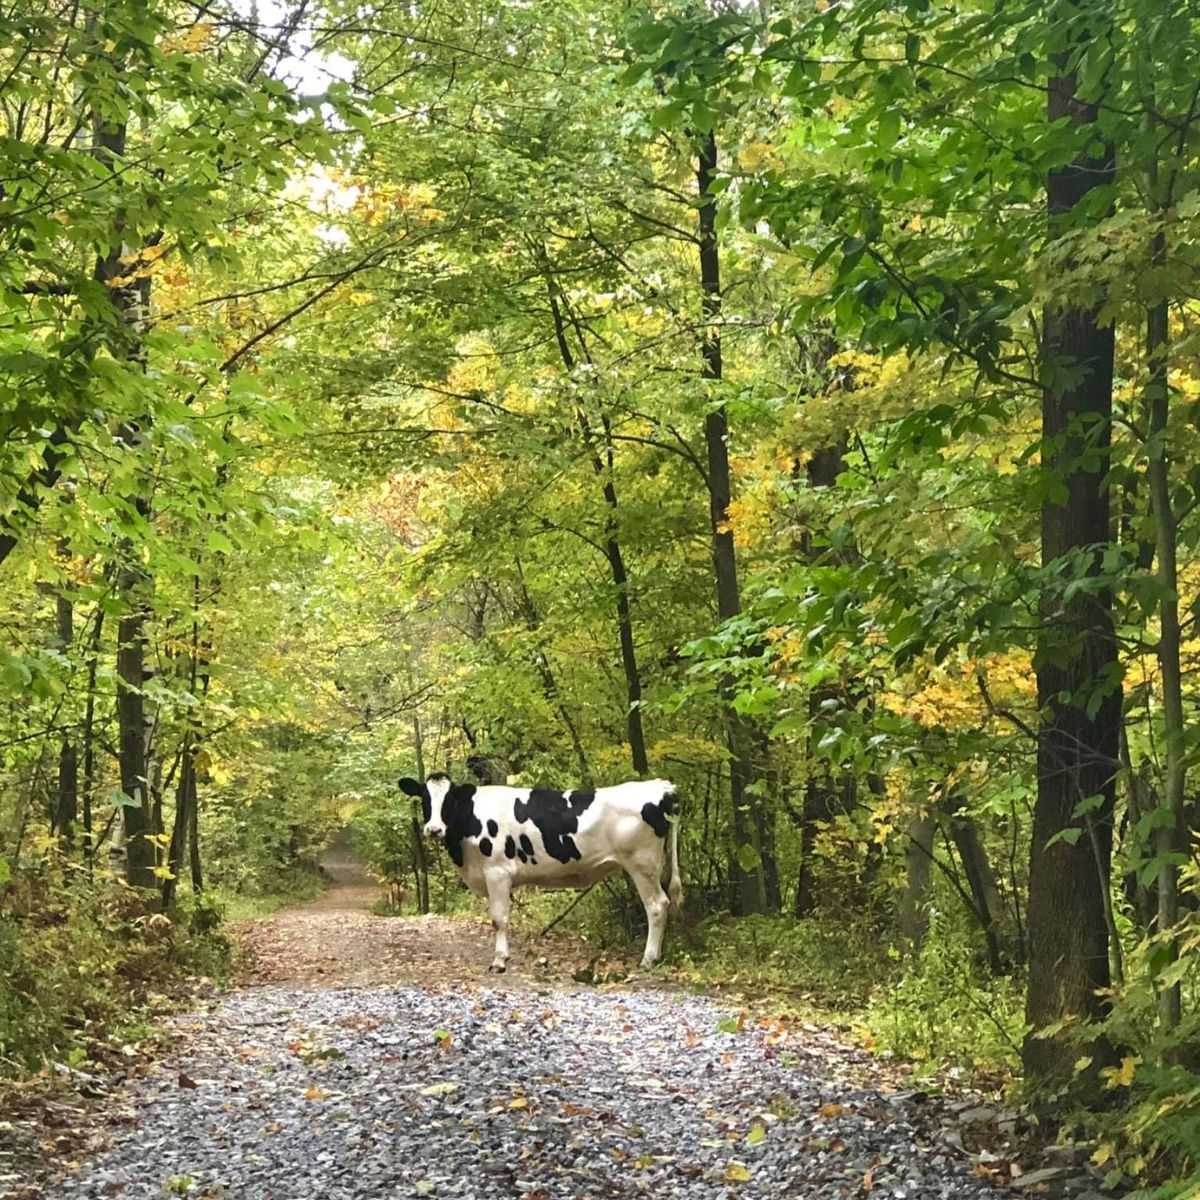 A black and white cow on a back road of Vermont with brightly colored yellow and green trees